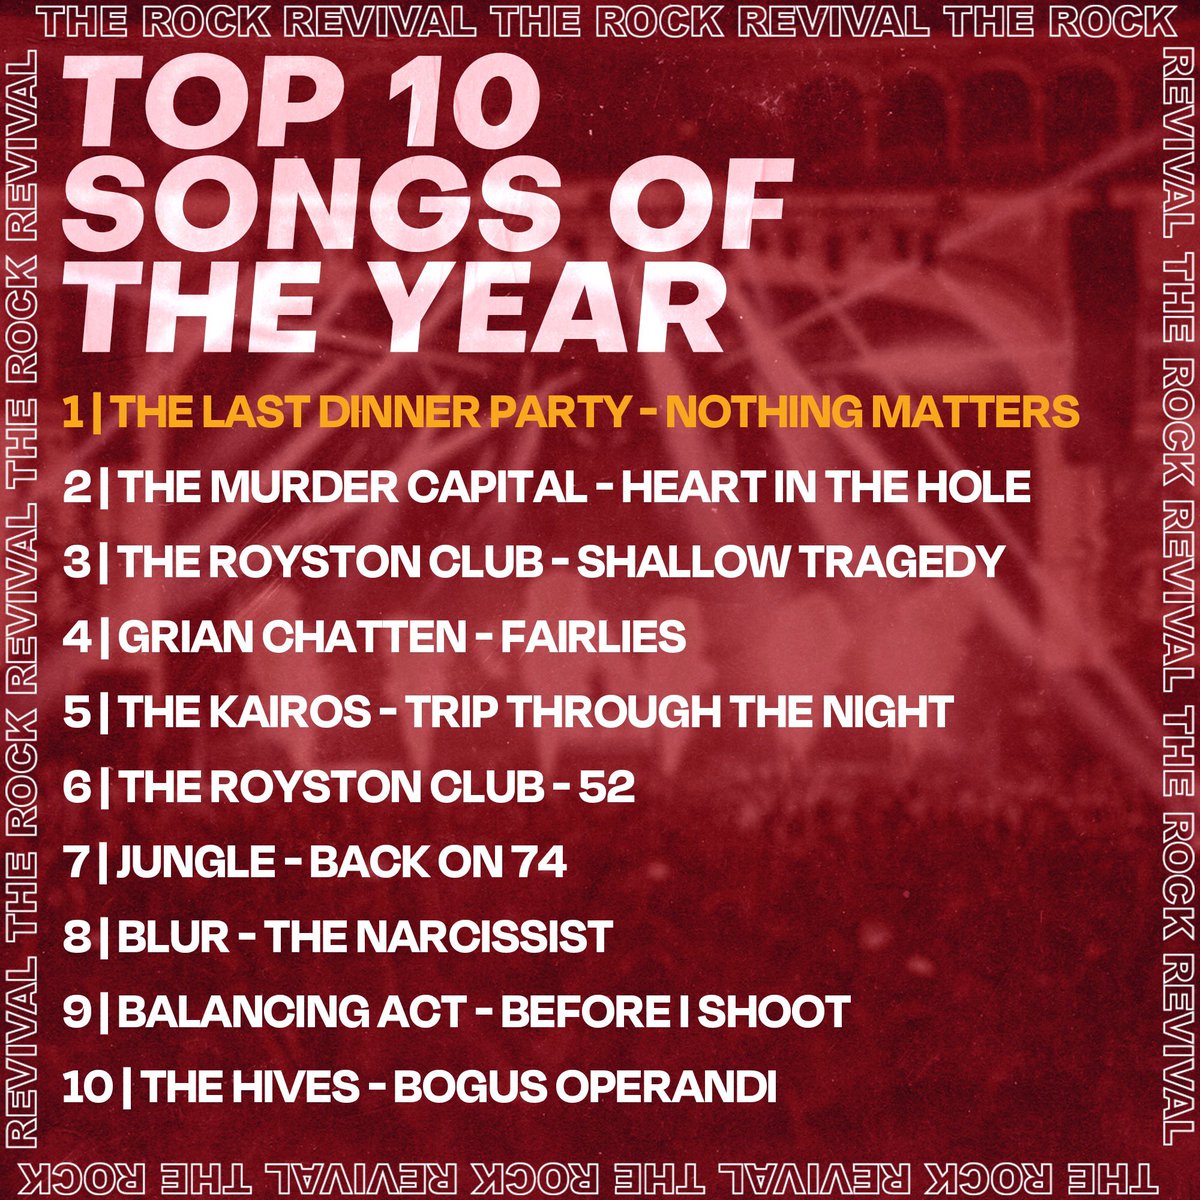 And that’s a wrap…. What a fun year for new music! It’s truly great to see the rise of some brilliant upcoming bands alongside some musical veterans who are still competing at the top 👏🏻 Here is our 2023 Top 10 Songs Of The Year list in full 👇🏻